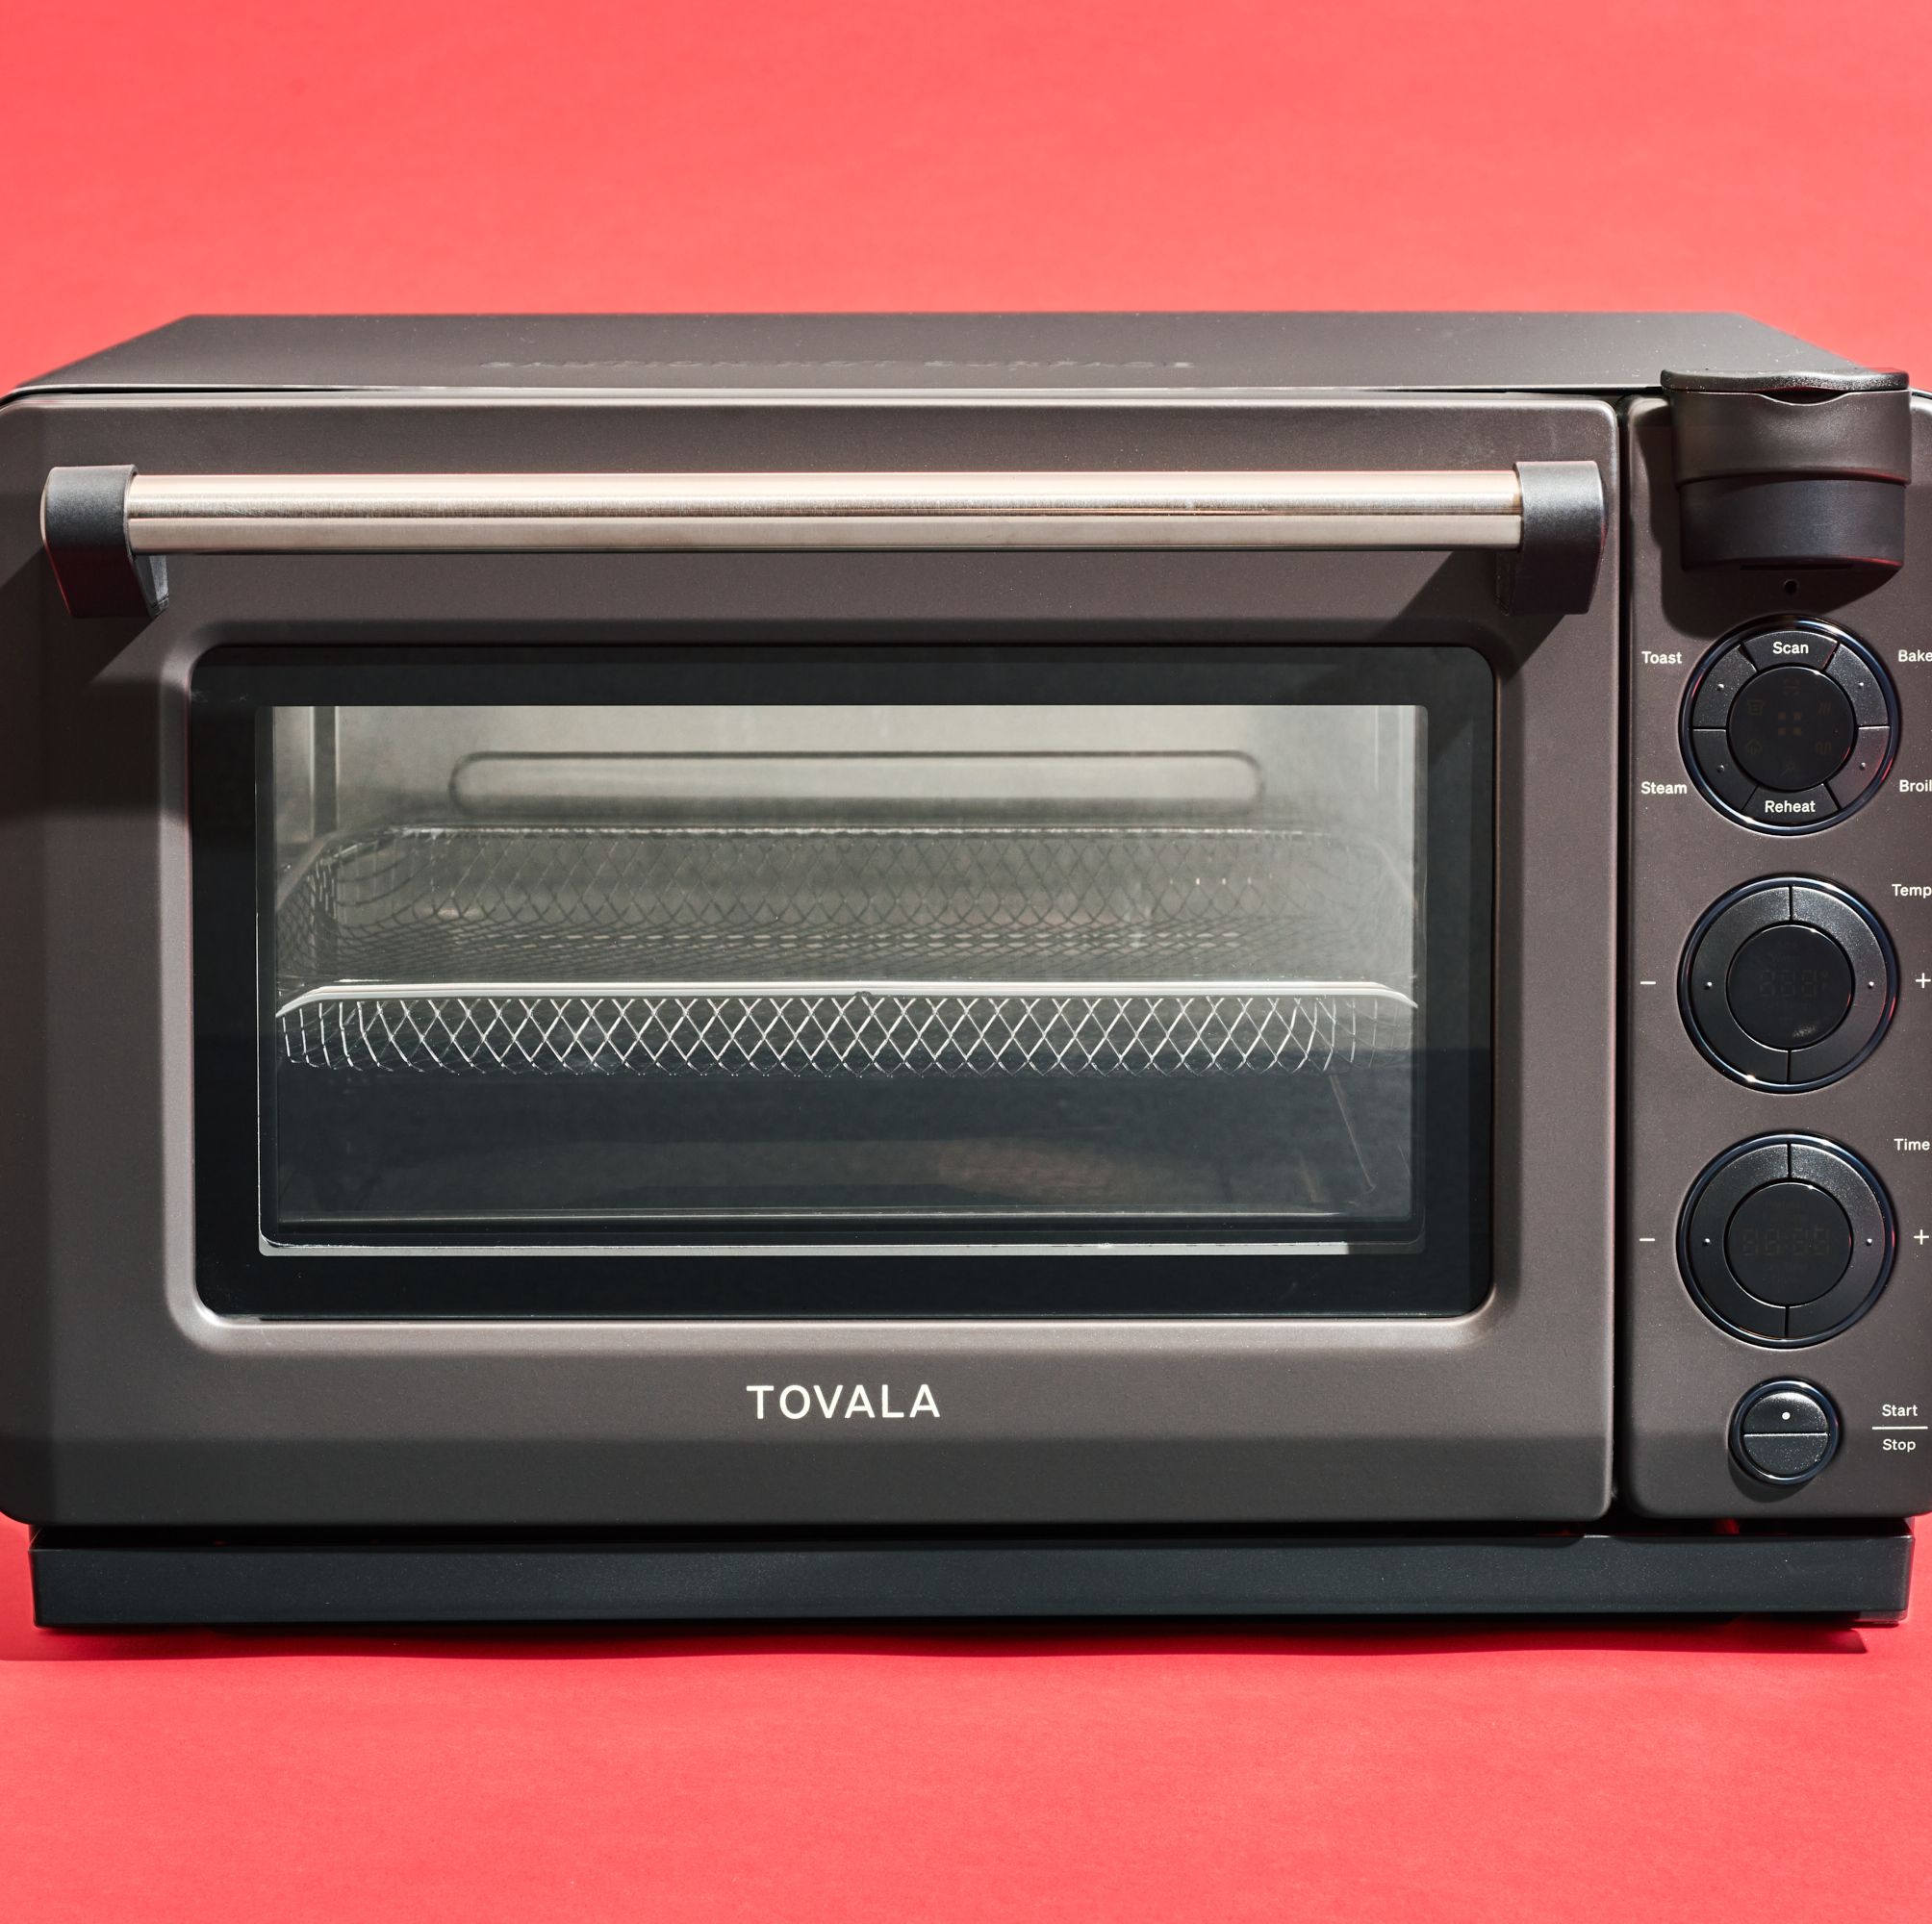 This Smart Oven Does It Better Than All the Rest